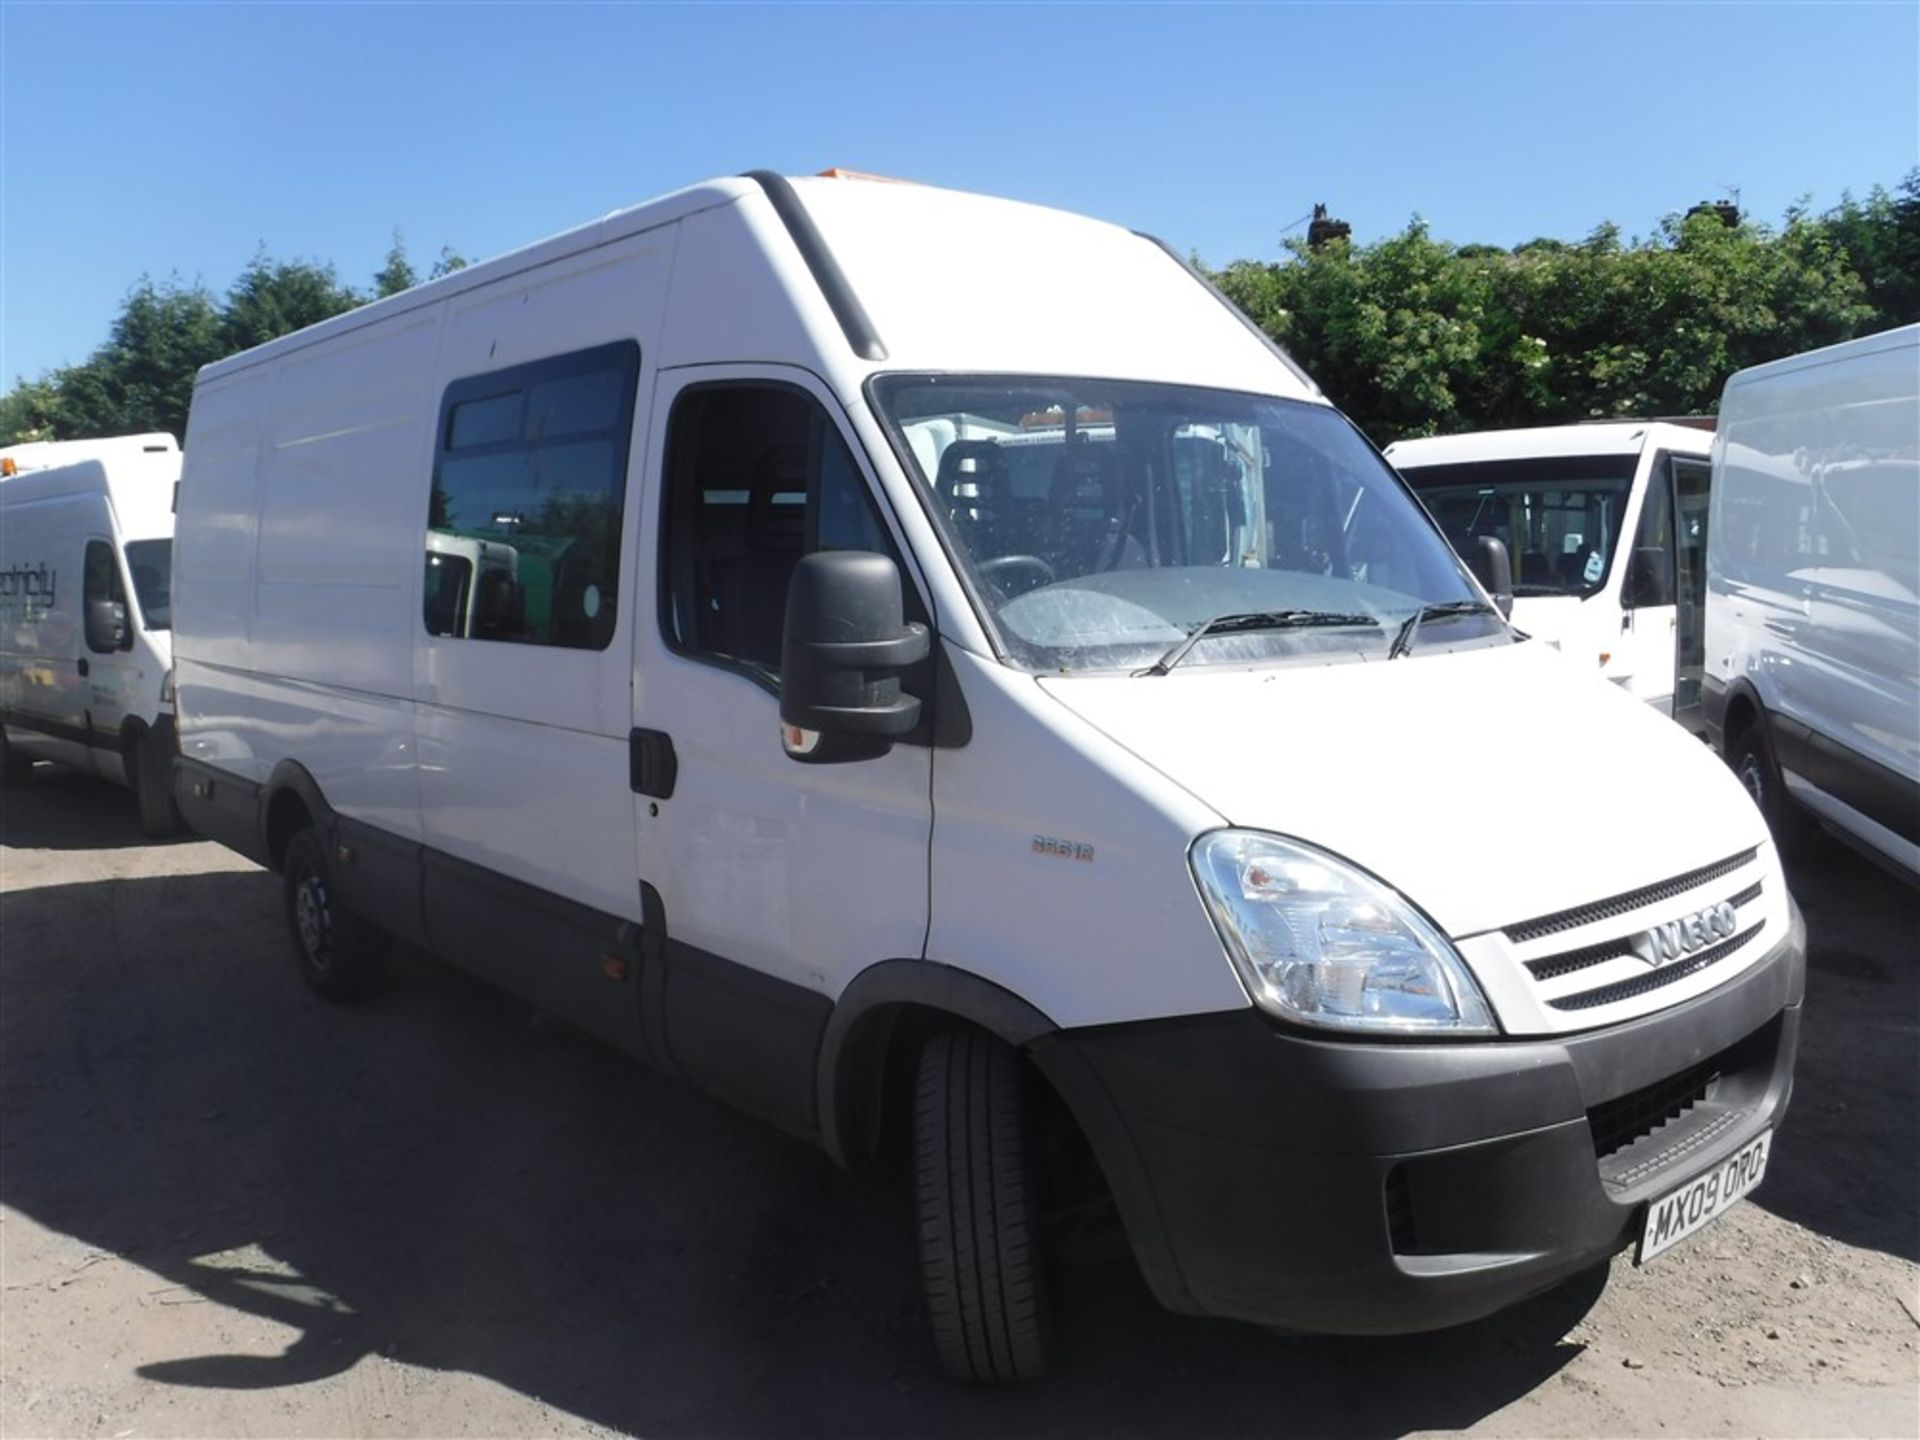 09 reg IVECO DAILY 35S12 LWB (DIRECT COUNCIL) 1ST REG 06/09, 69213M, V5 HERE, 1 OWNER FROM NEW [+